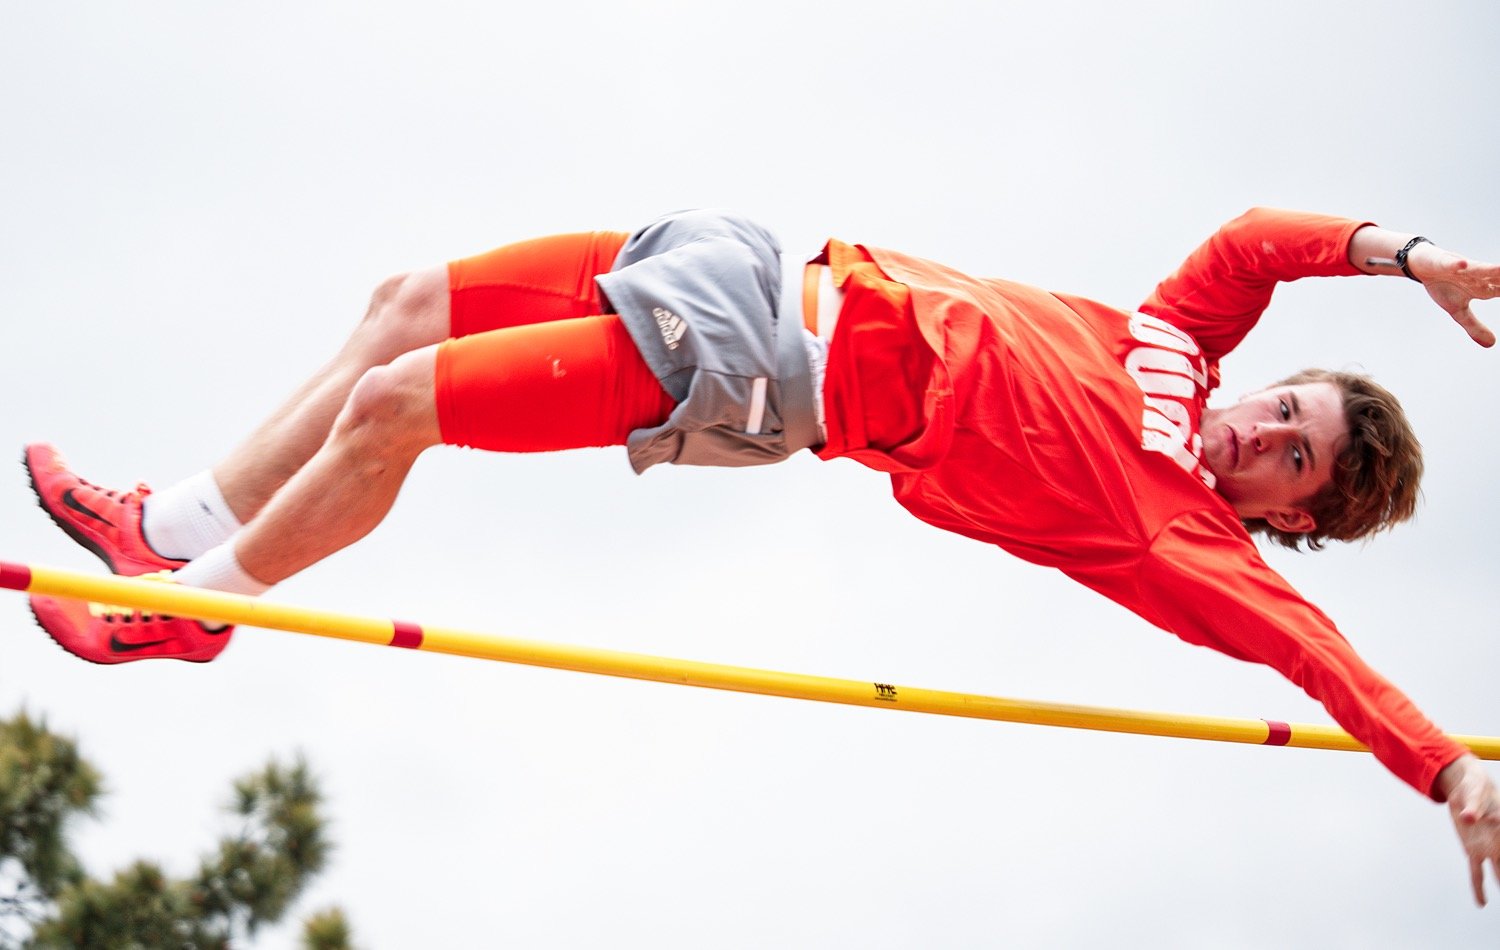 Adam Blalock cleared 12'6" to take first place in the pole vault. [run, don't walk, for more shots]